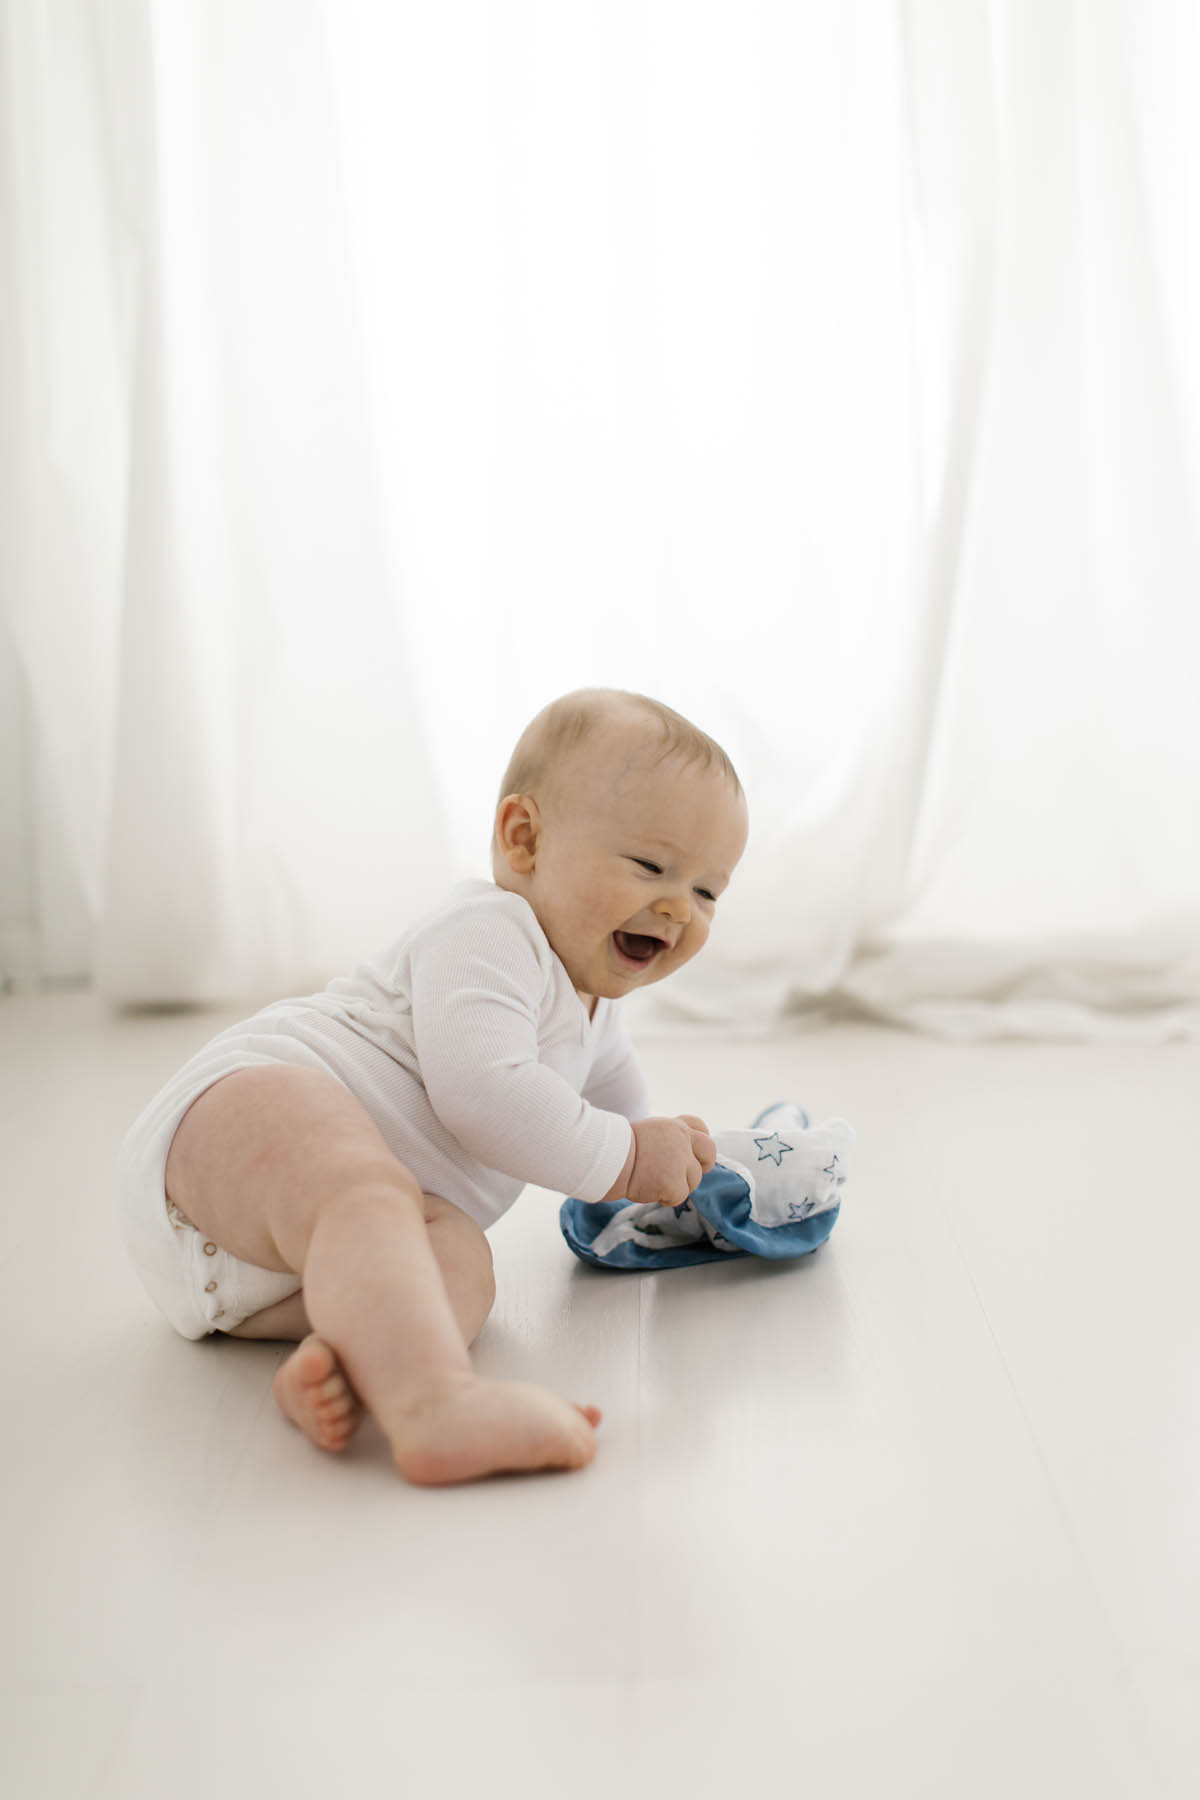 Elle Baker Photography captures baby boy laughing and holding his blanket